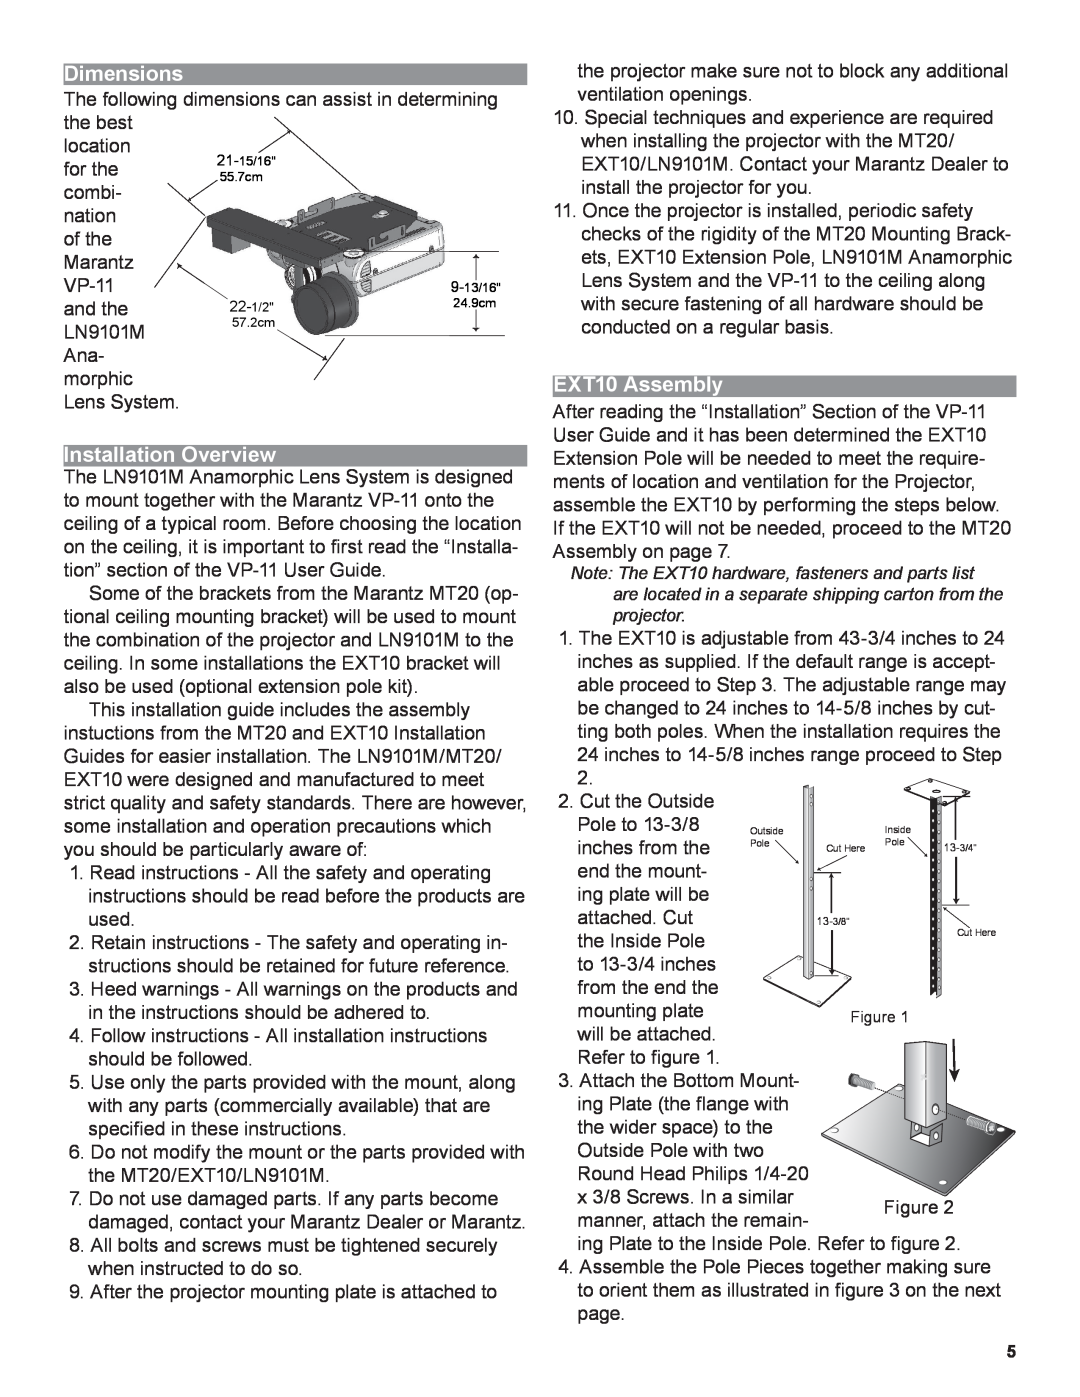 Marantz LN9101M manual Dimensions, Installation Overview, EXT10 Assembly 